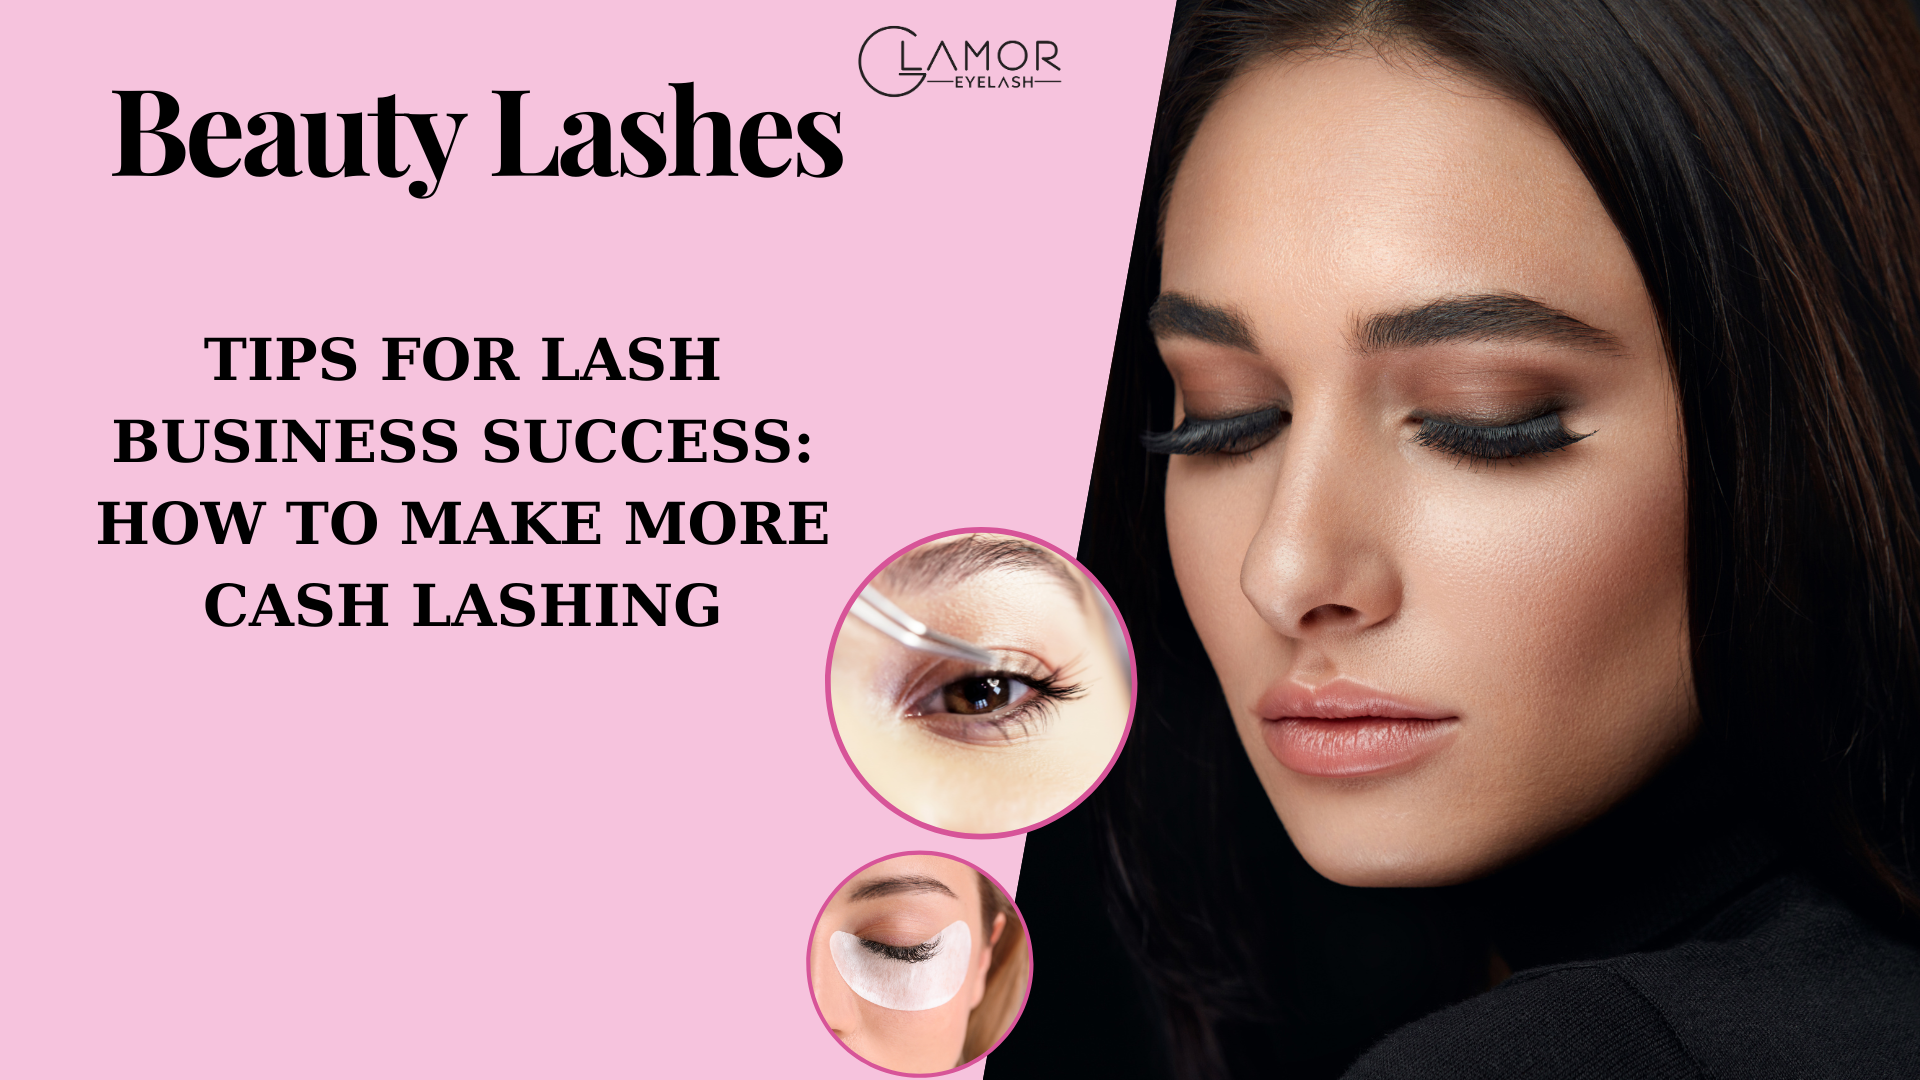 TIPS FOR LASH BUSINESS SUCCESS: HOW TO MAKE MORE CASH LASHING